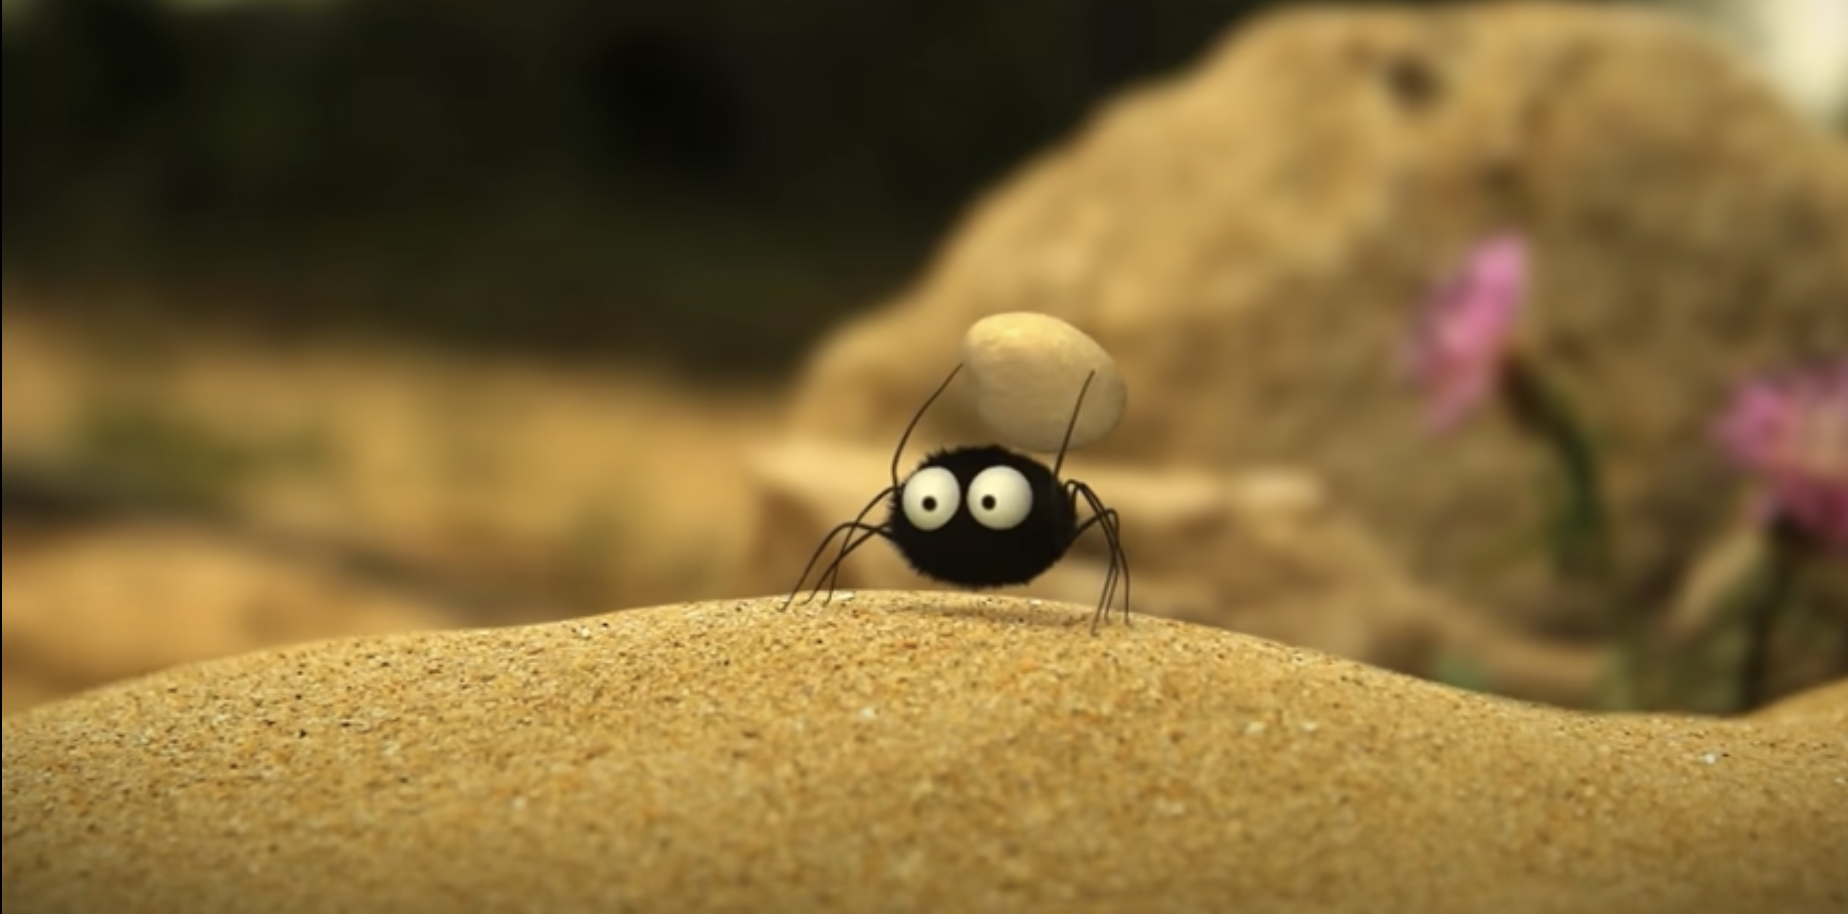 Miniscule bug holding up a rock